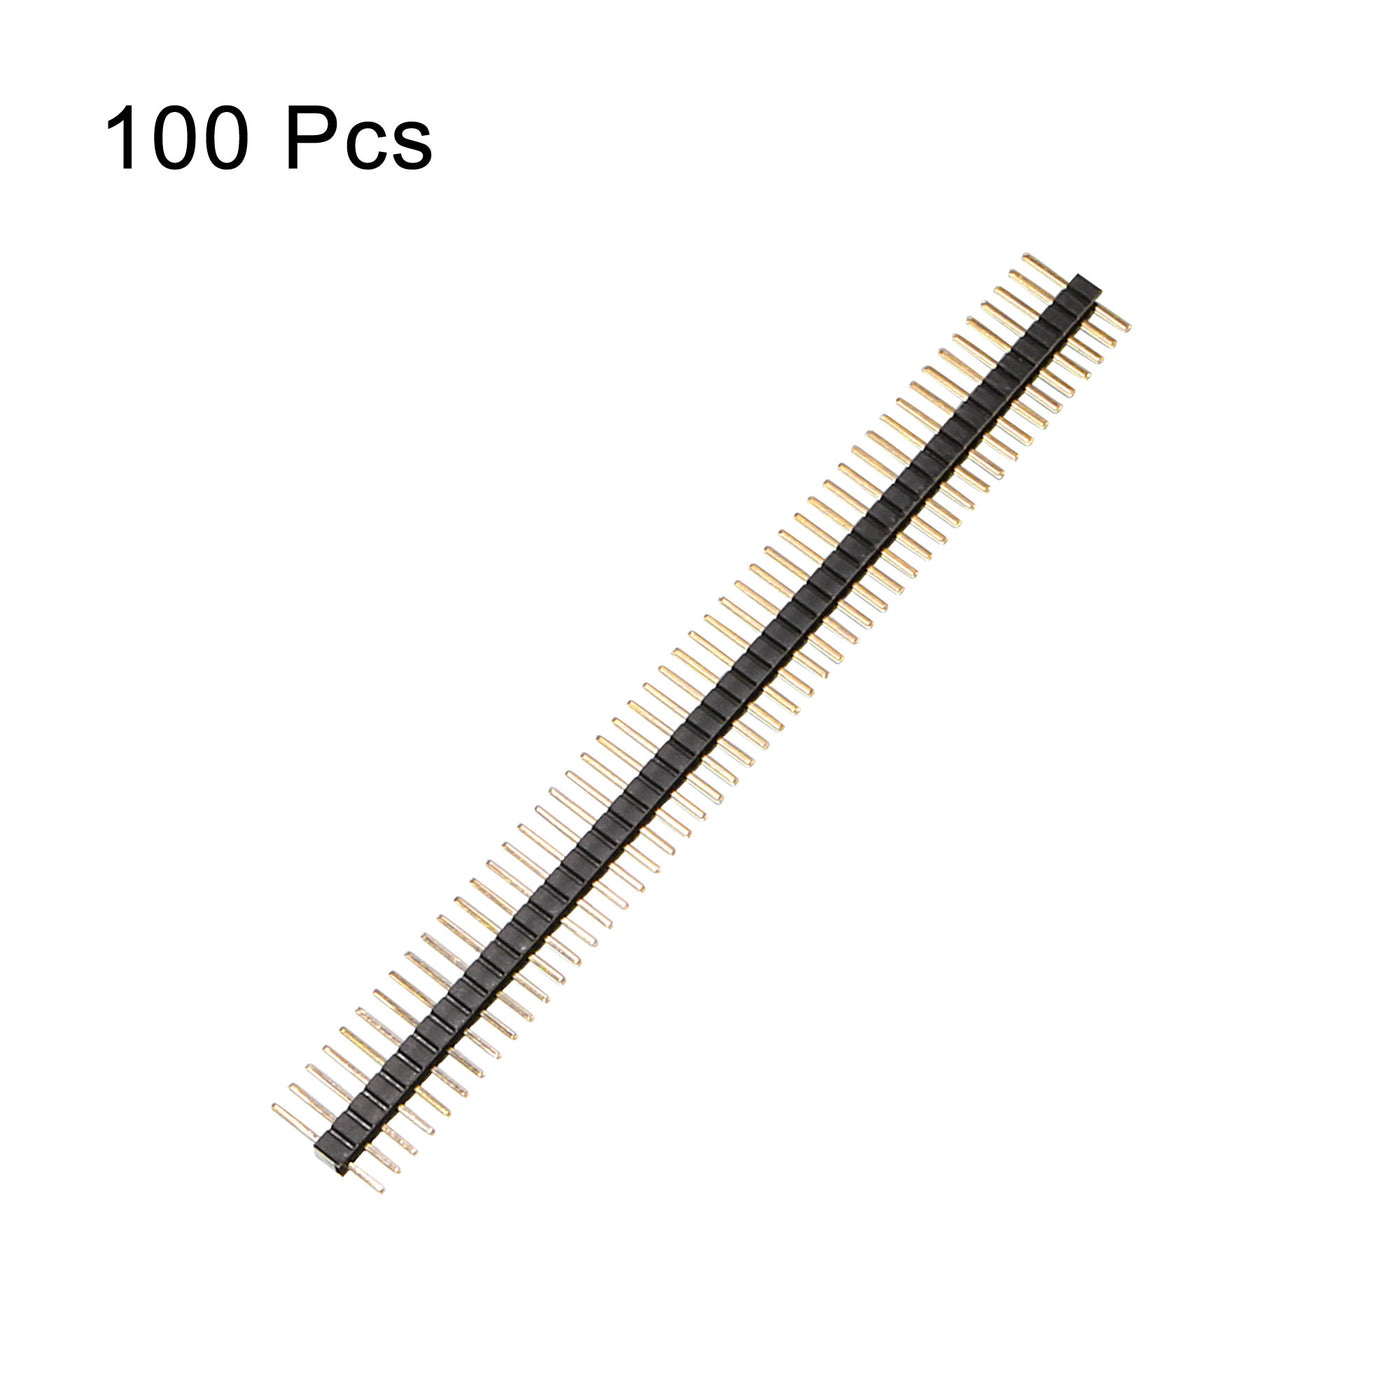 uxcell Uxcell 100pcs 50 Way Single Row Straight Pin Male Header Strip 1.27mm Pitch